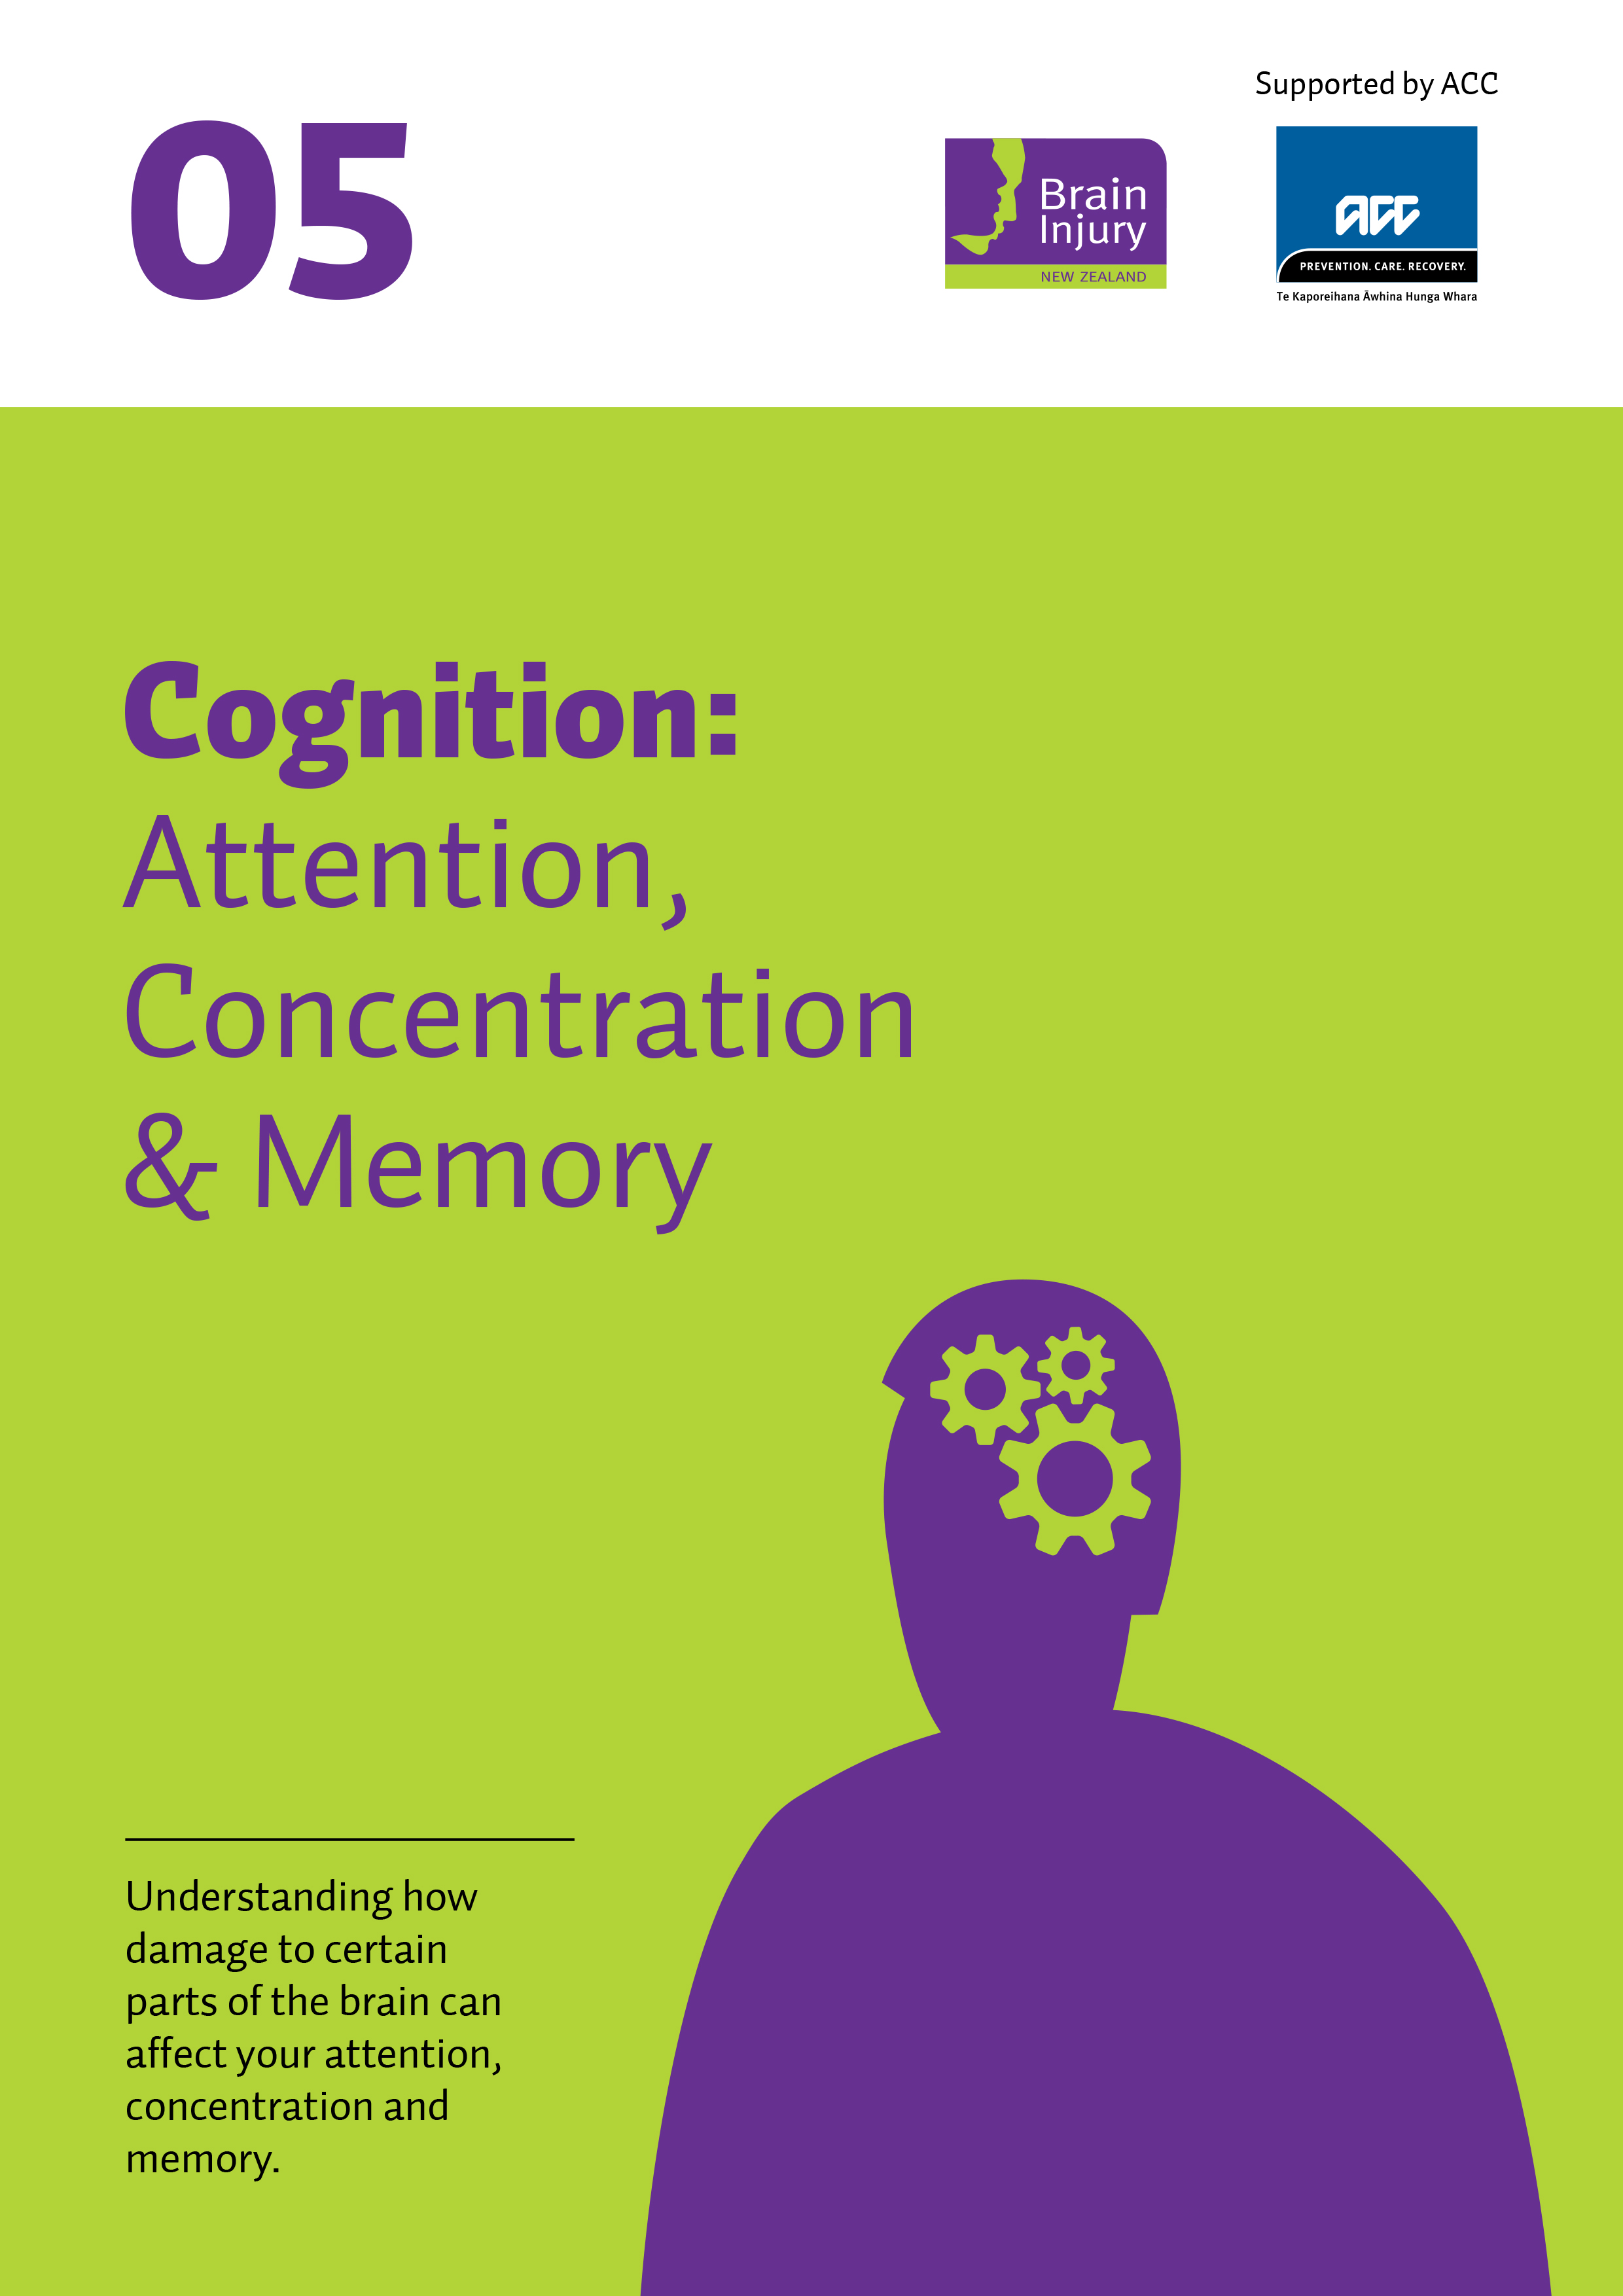 05 Cognition: Attention, Concentration & Memory